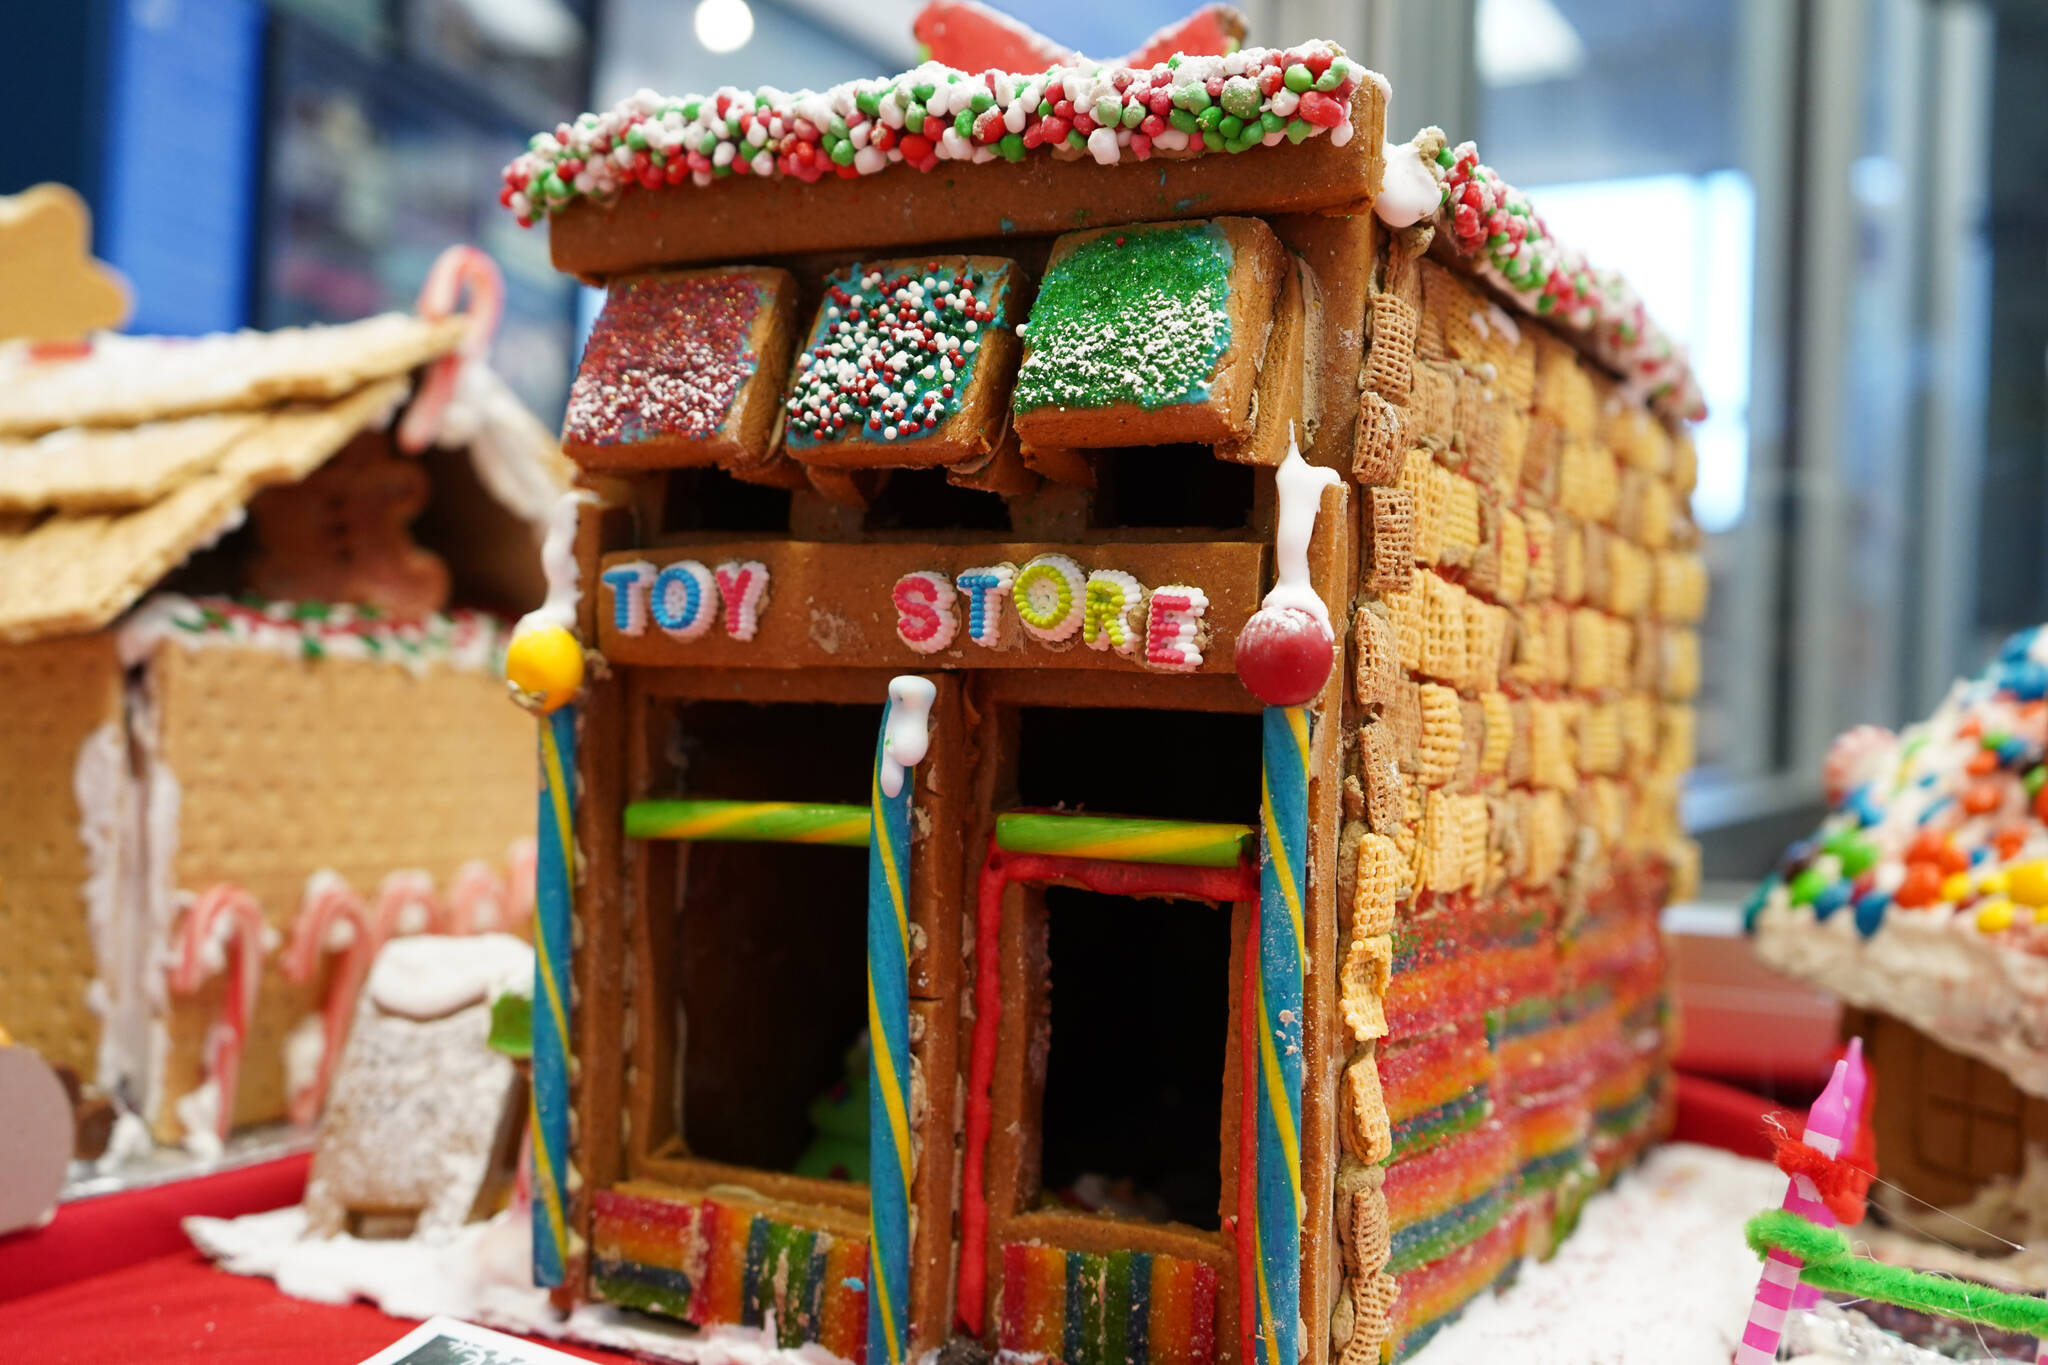 A gingerbread toy store constructed by 5-year-old Easton is displayed as part of the 11th Annual Gingerbread House Contest at the Kenai Chamber of Commerce and Visitor Center in Kenai, Alaska, on Thursday, Nov. 16, 2023. (Jake Dye/Peninsula Clarion)